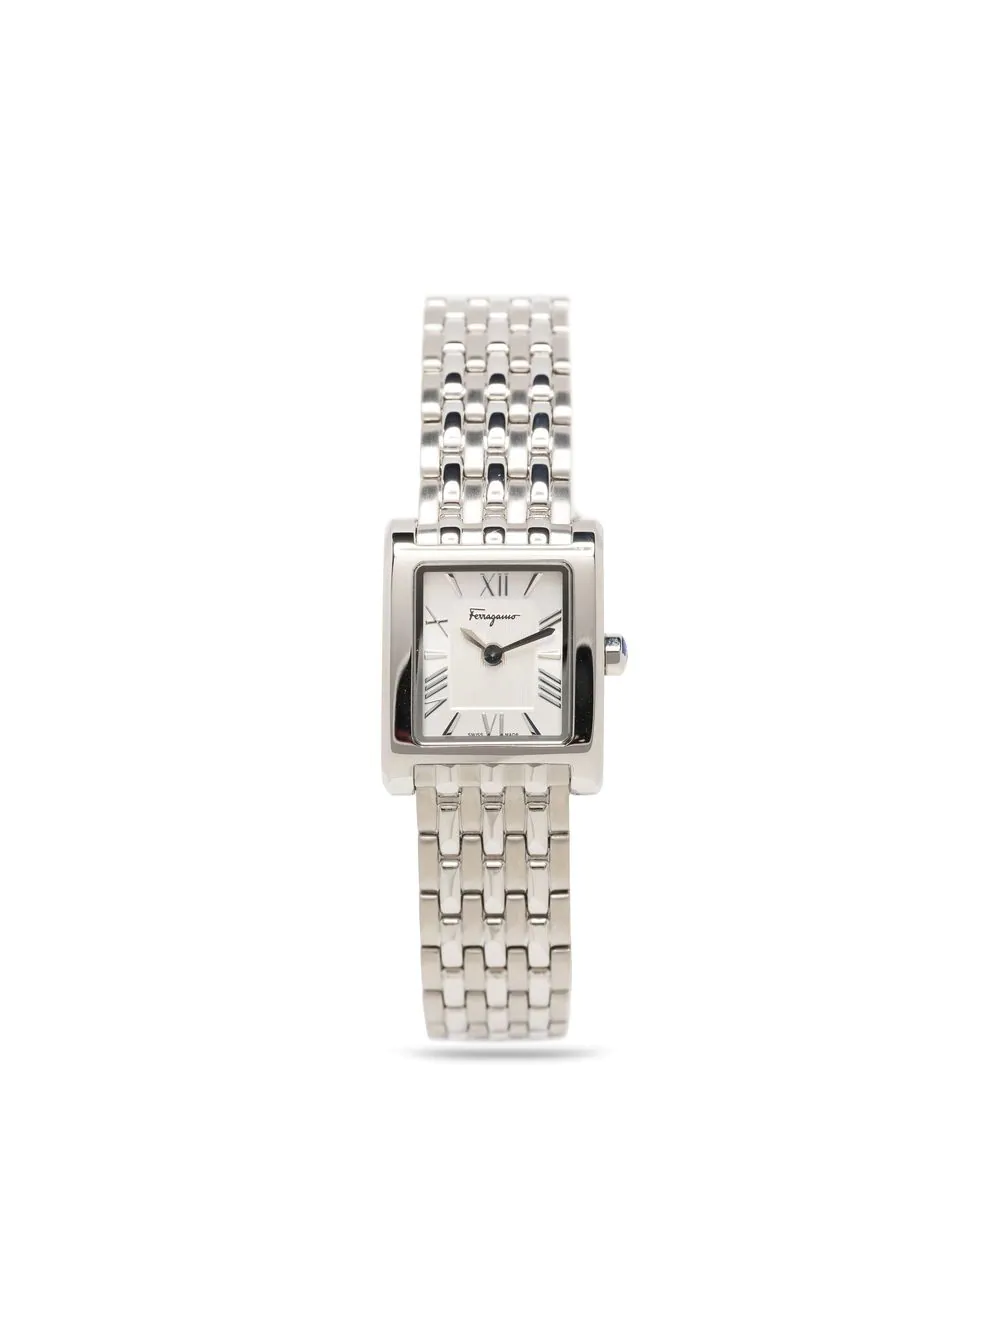 20x25mm lace square face watch